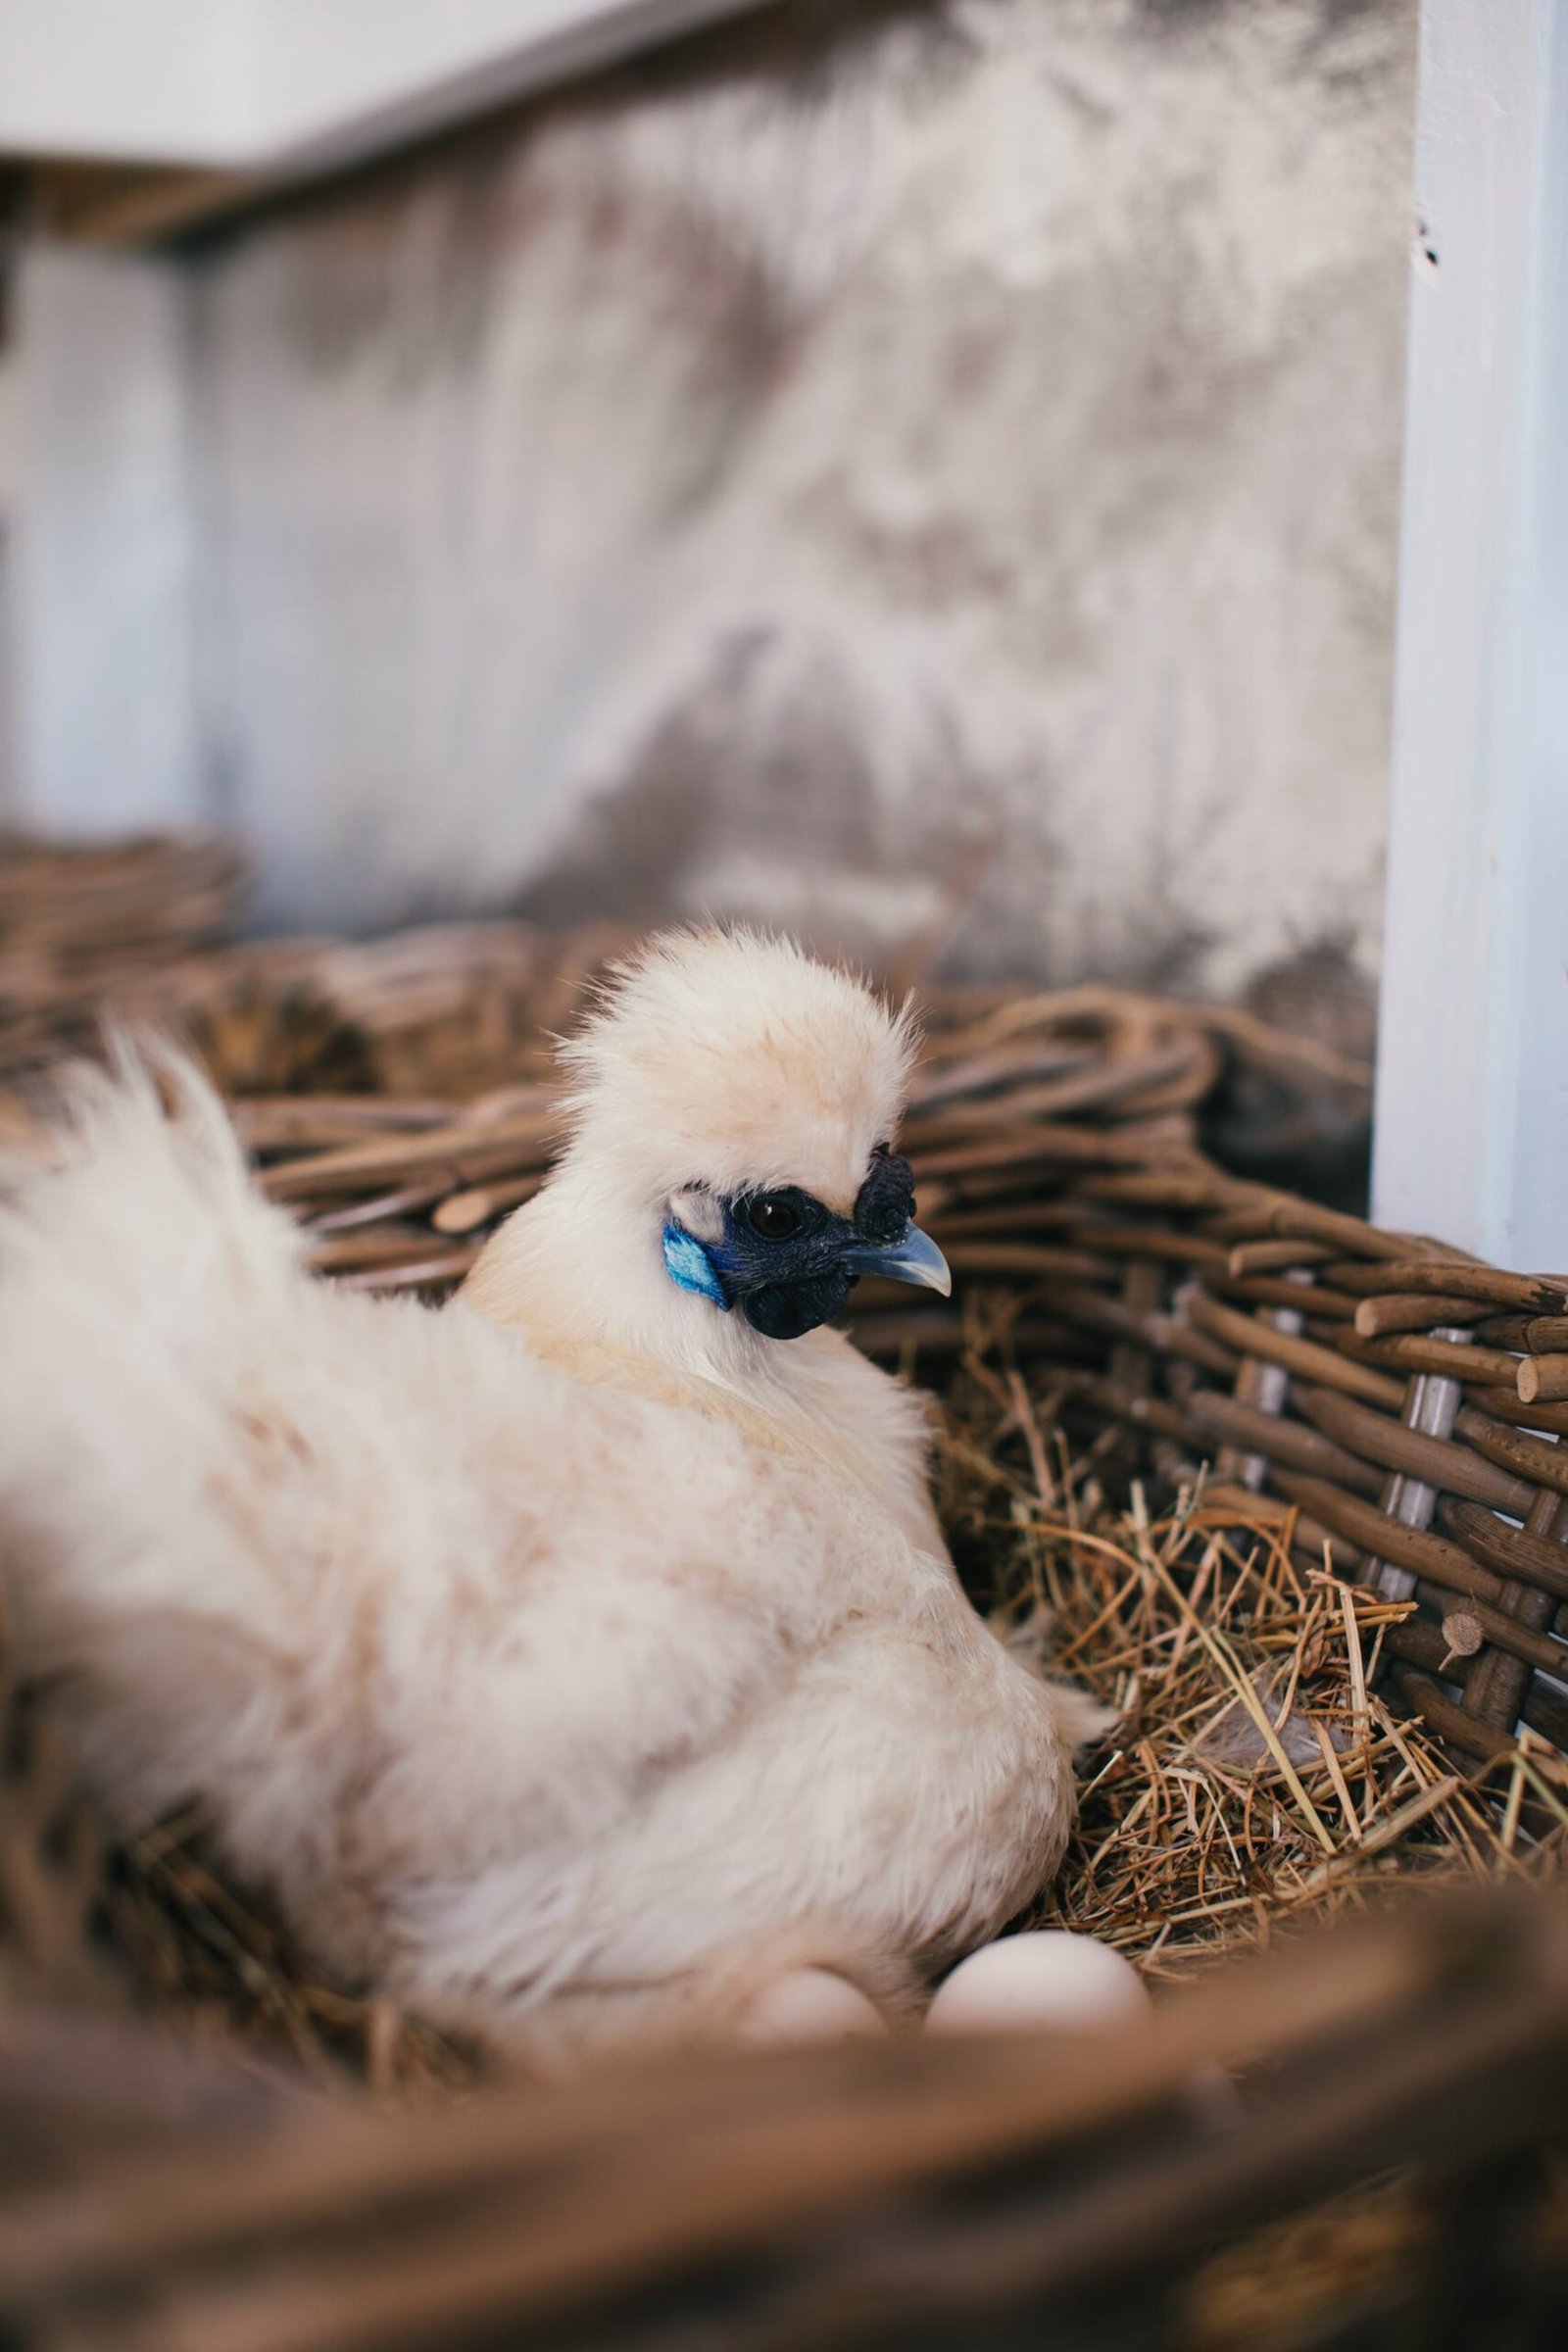 How Can You Tell If A Chicken Is Broody, And What Should You Do?